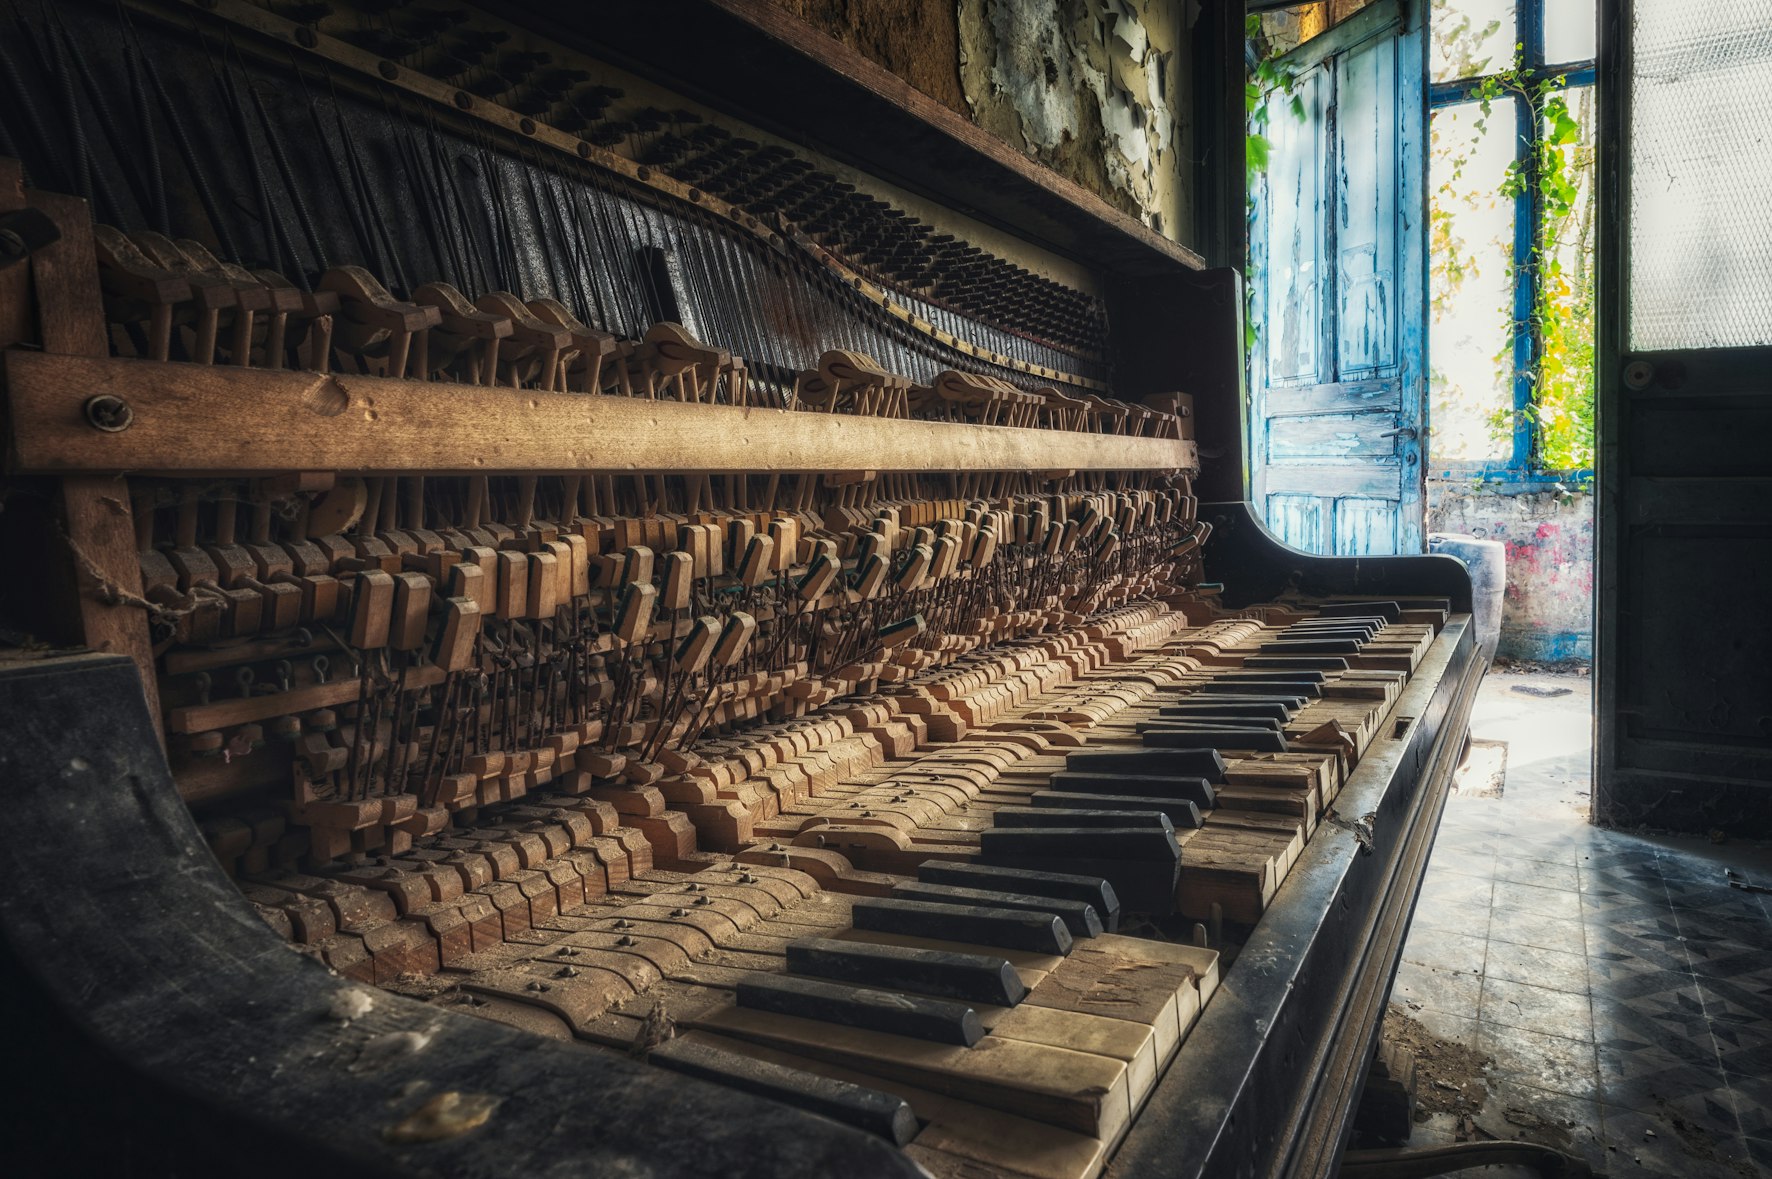 Creepy looking old broken piano with hammers and strings exposed.